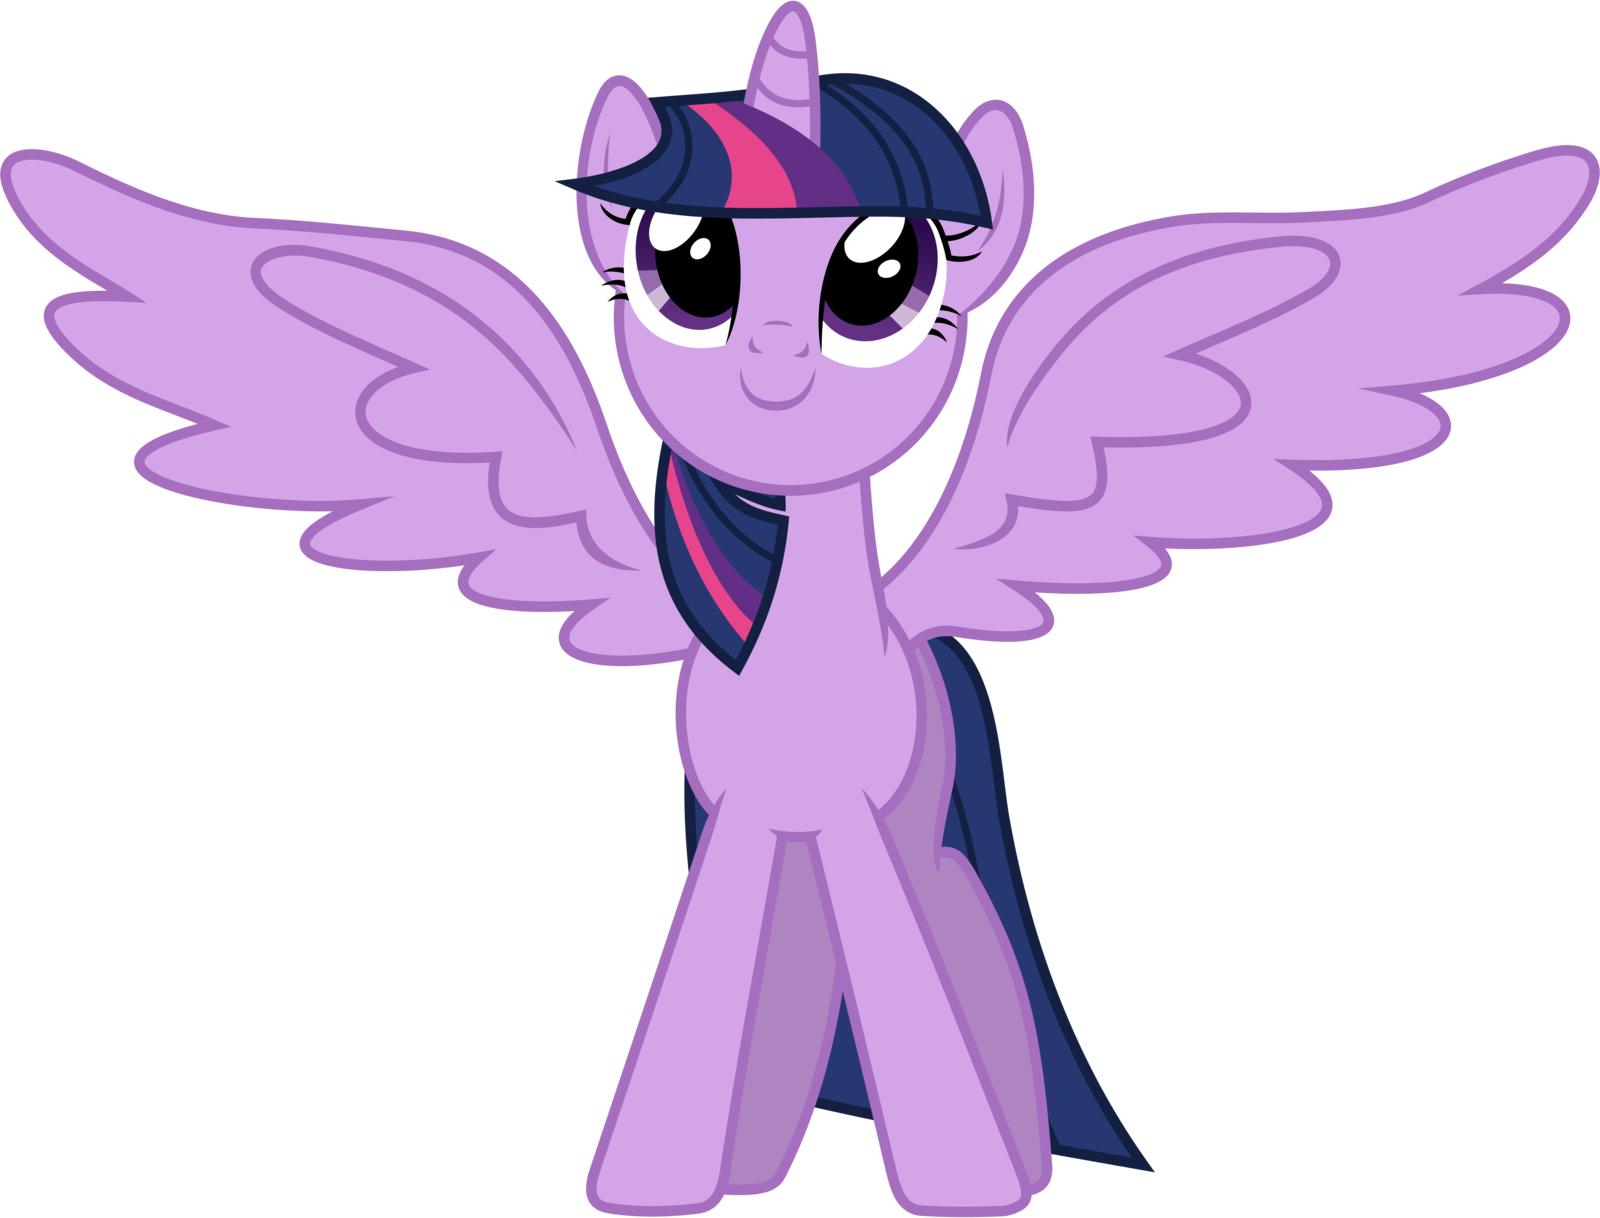 Princess Twilight Sparkle [Ready] - Friendship is Magic Cast - Canterlot - My  Little Pony Community and Role Play